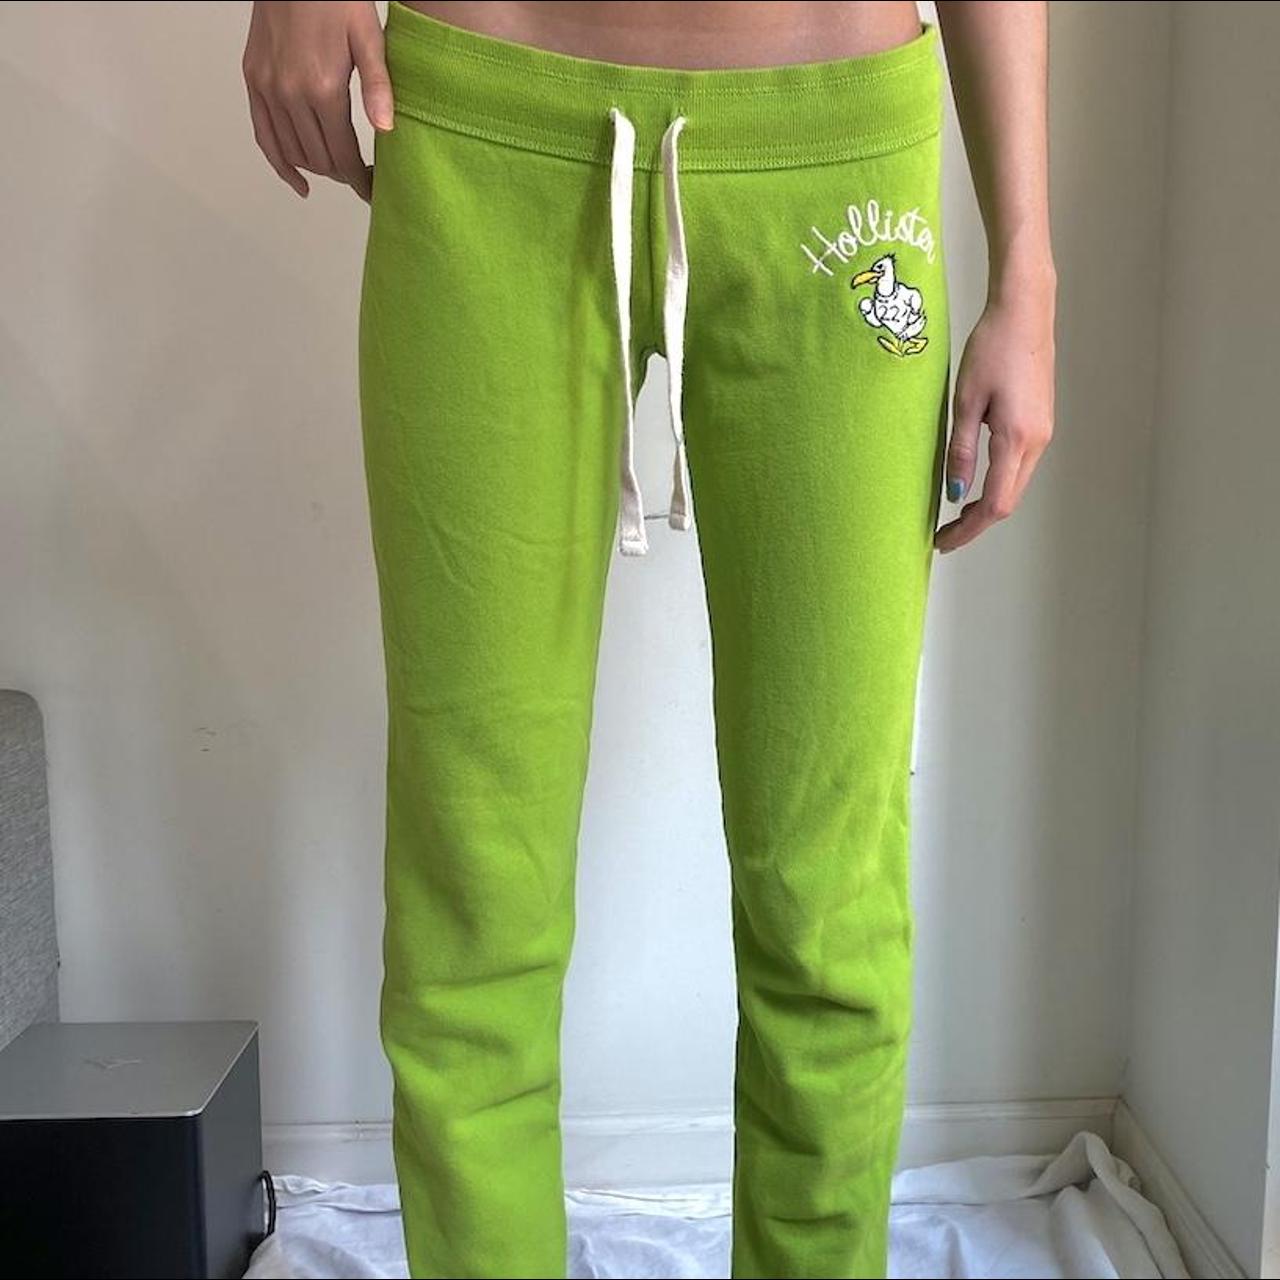 Bright green hollister sweatpants with cute duck